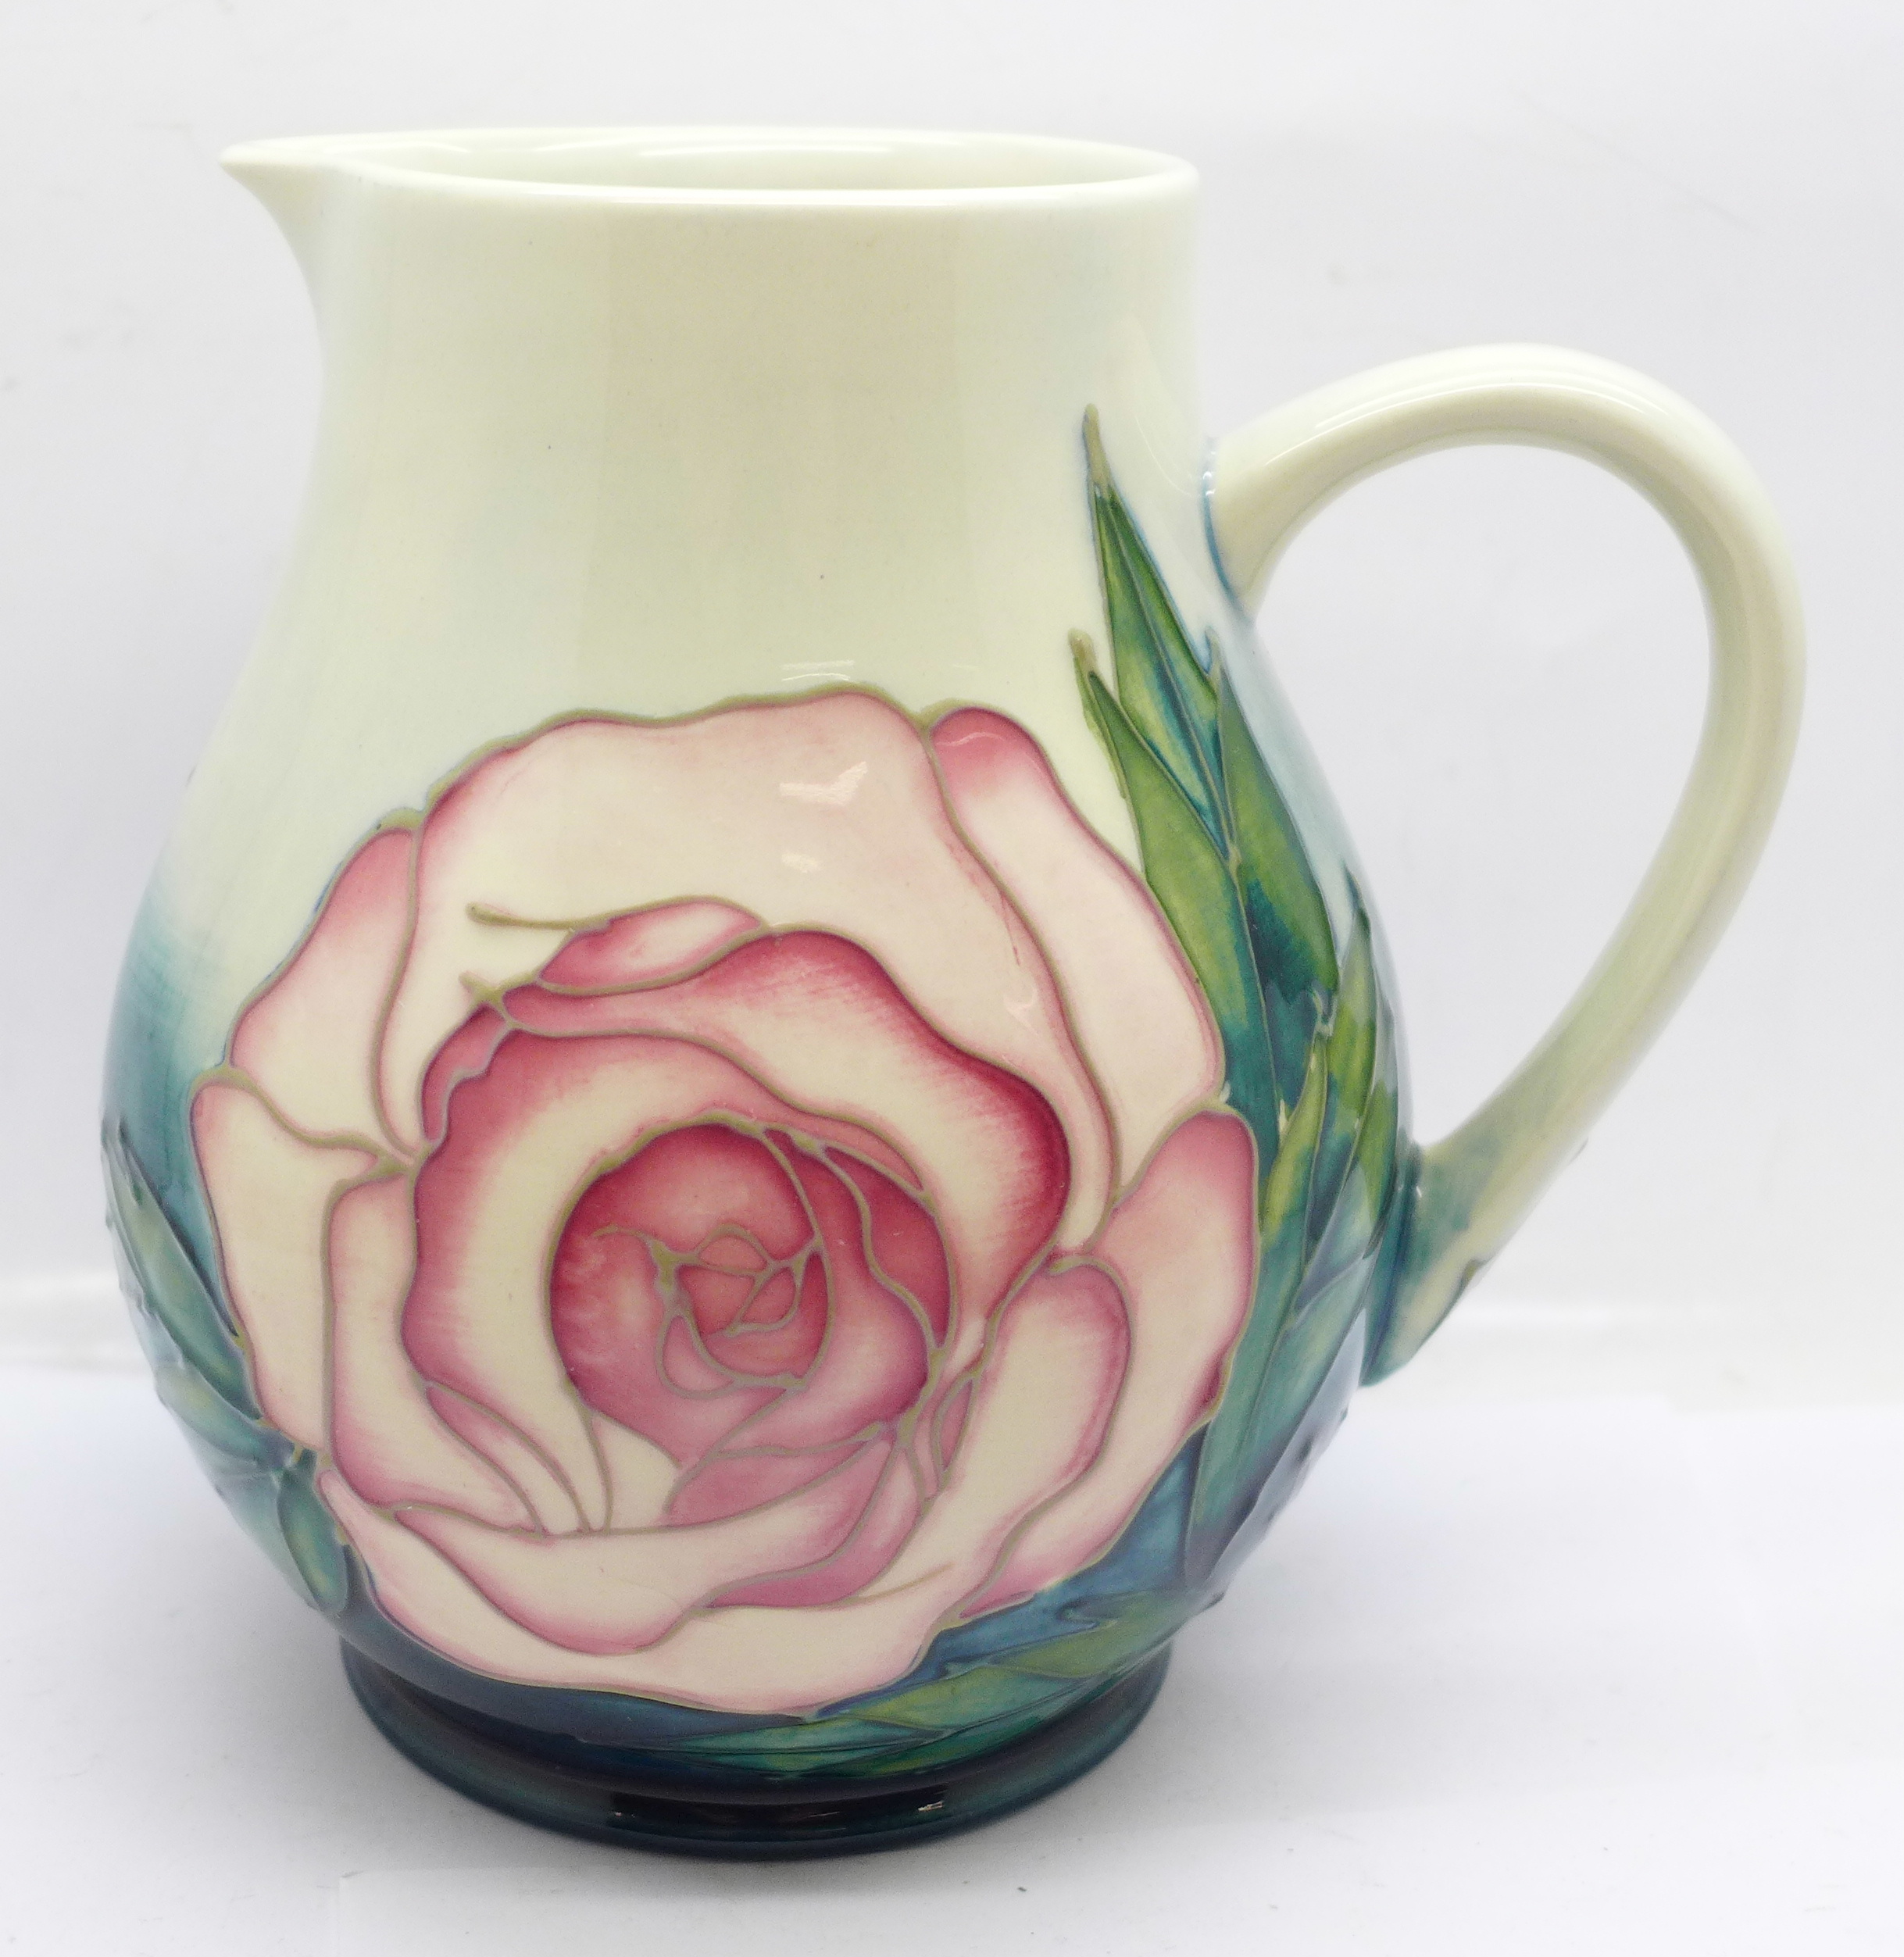 A Moorcroft Collectors Club rose jug, designed by Sally Tuffin, 14.5cm